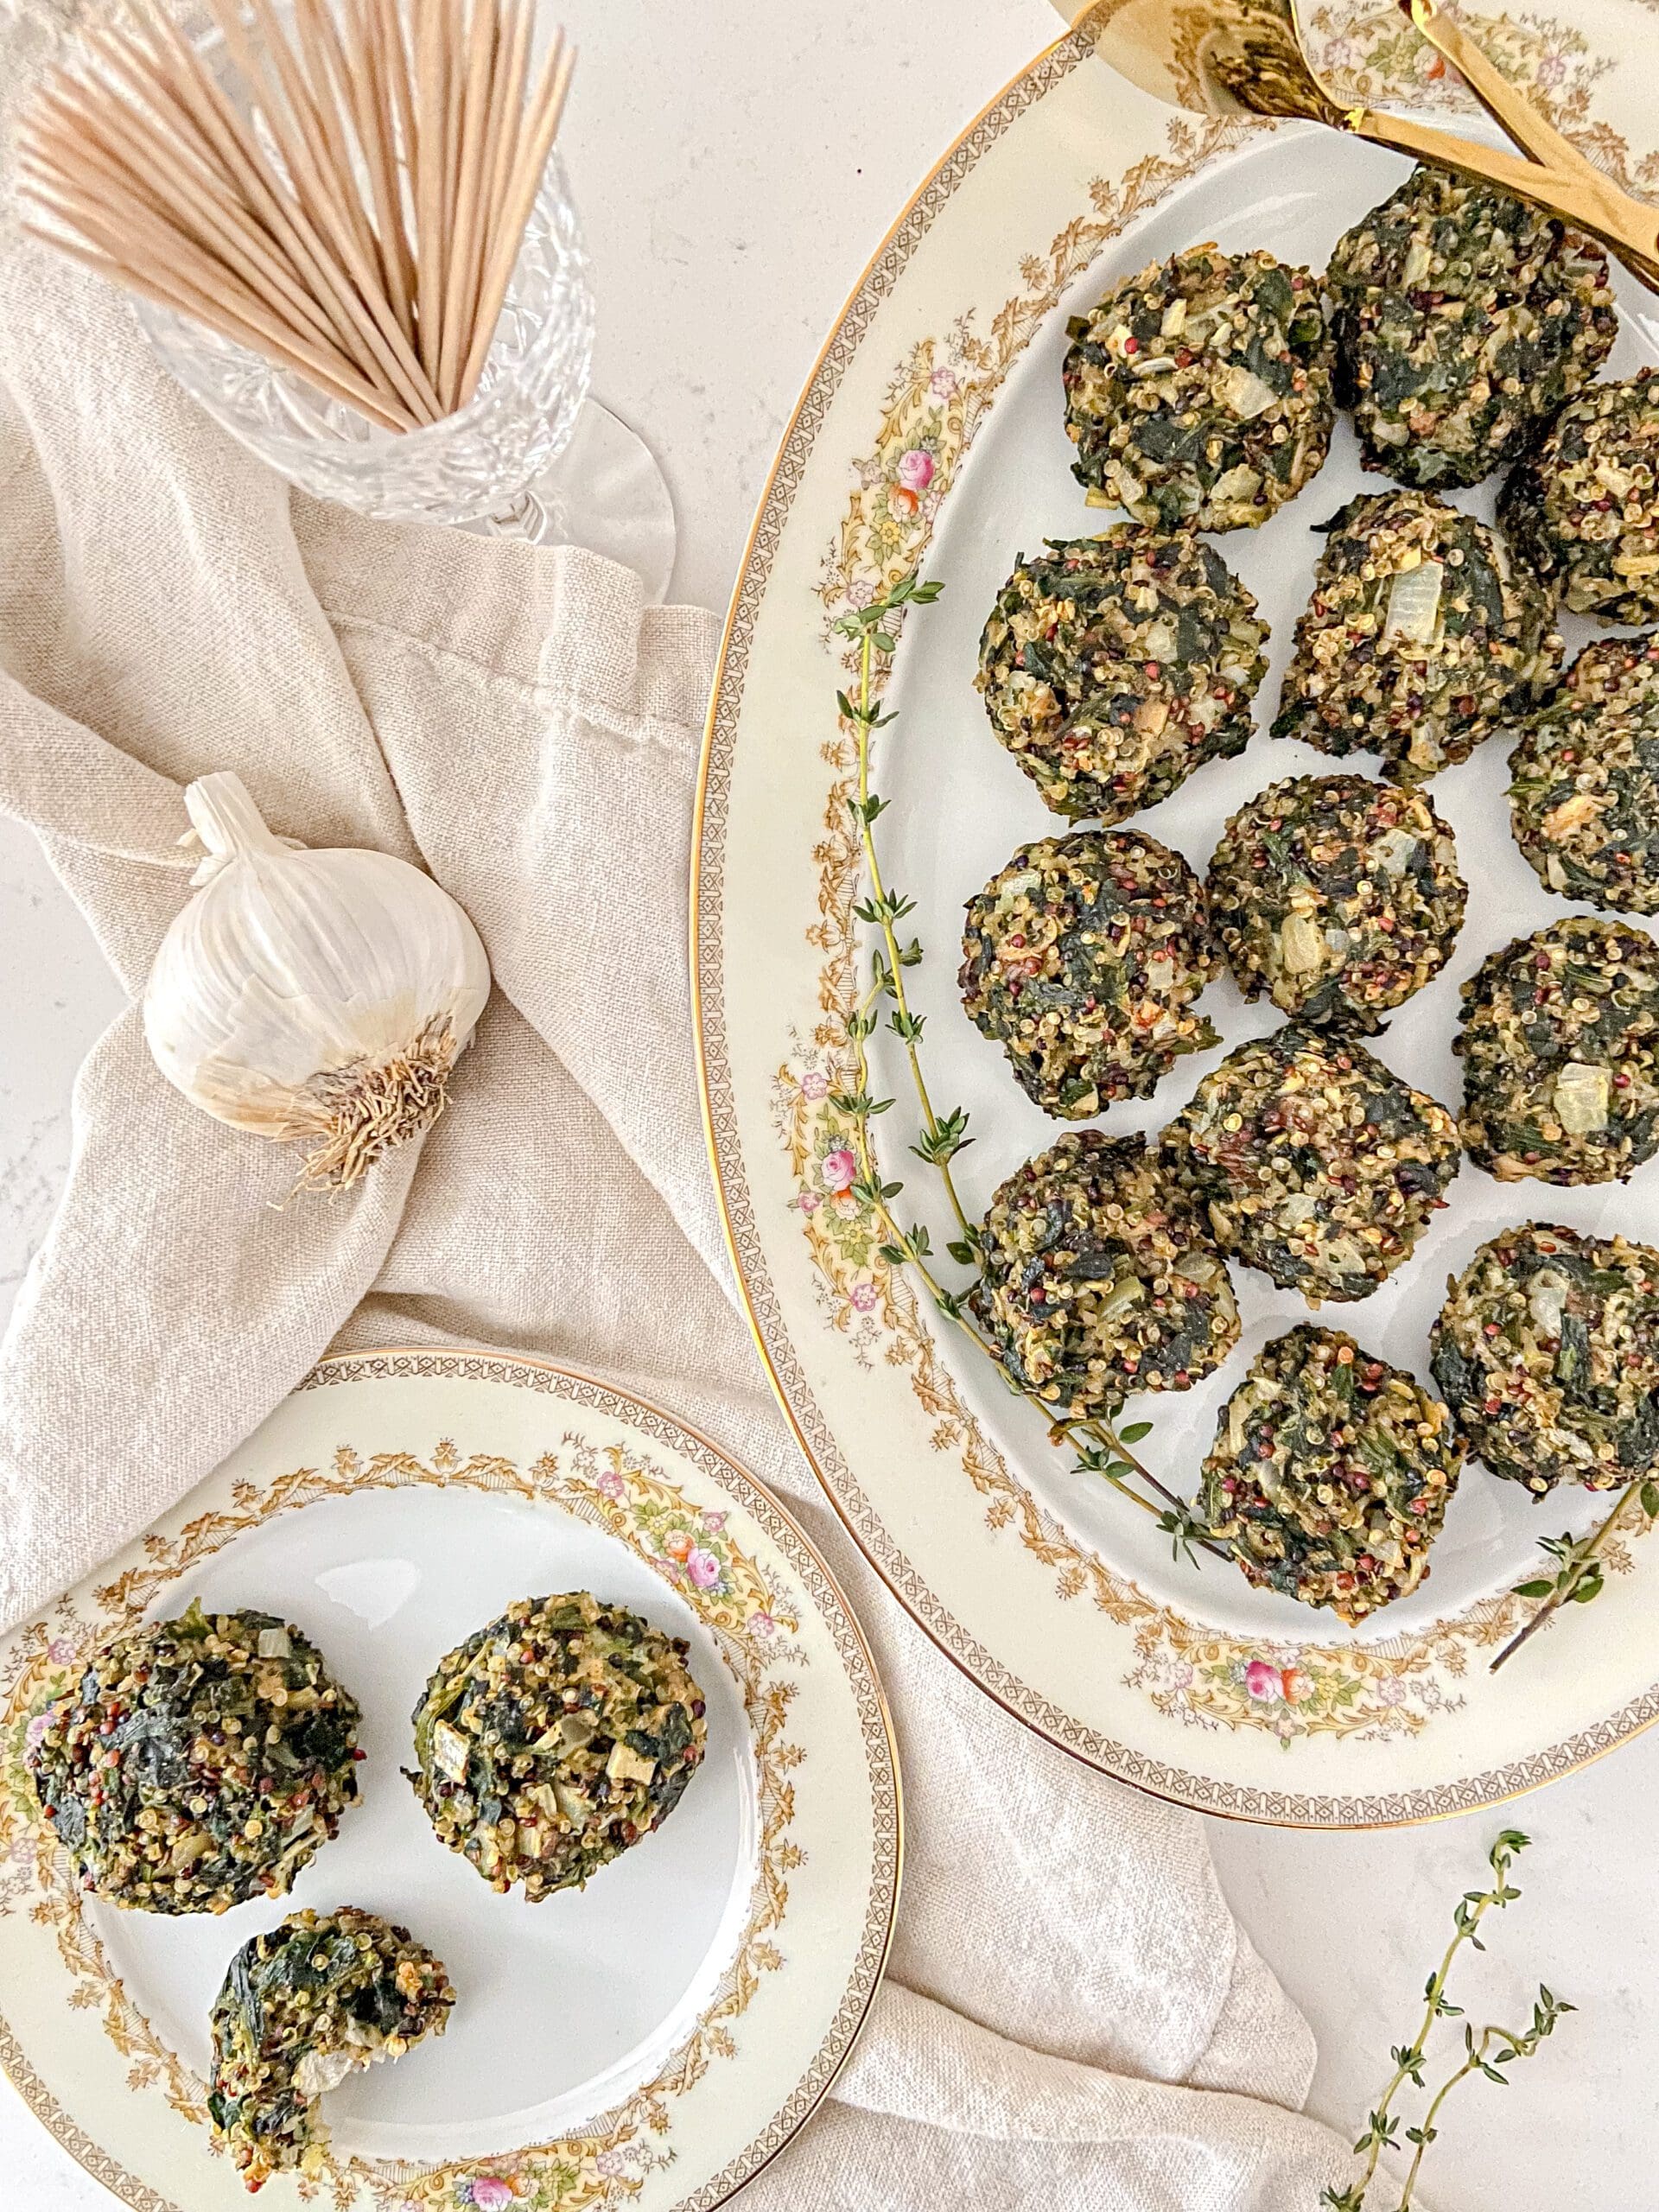 Spinach ball appetizers on a platter.